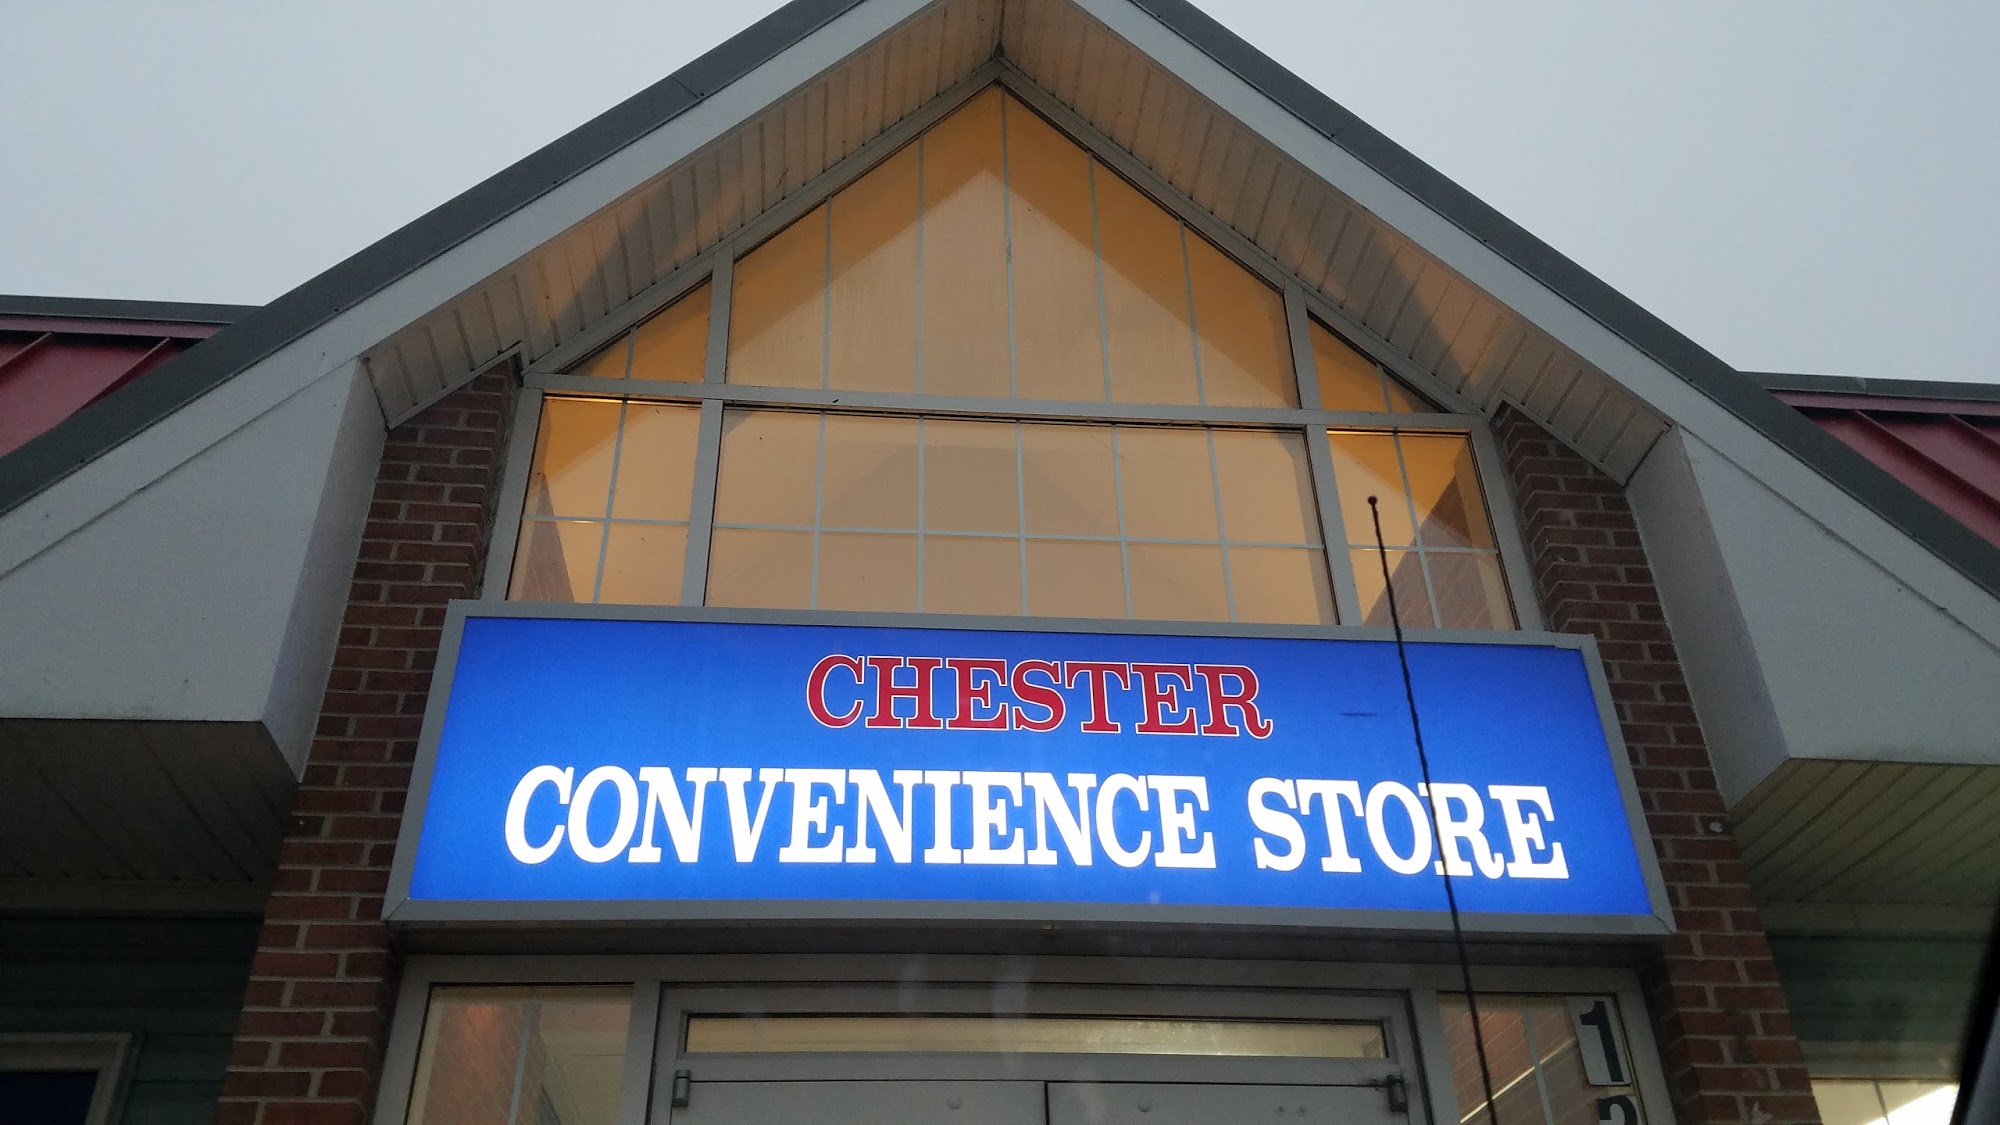 Chester Convenience Store